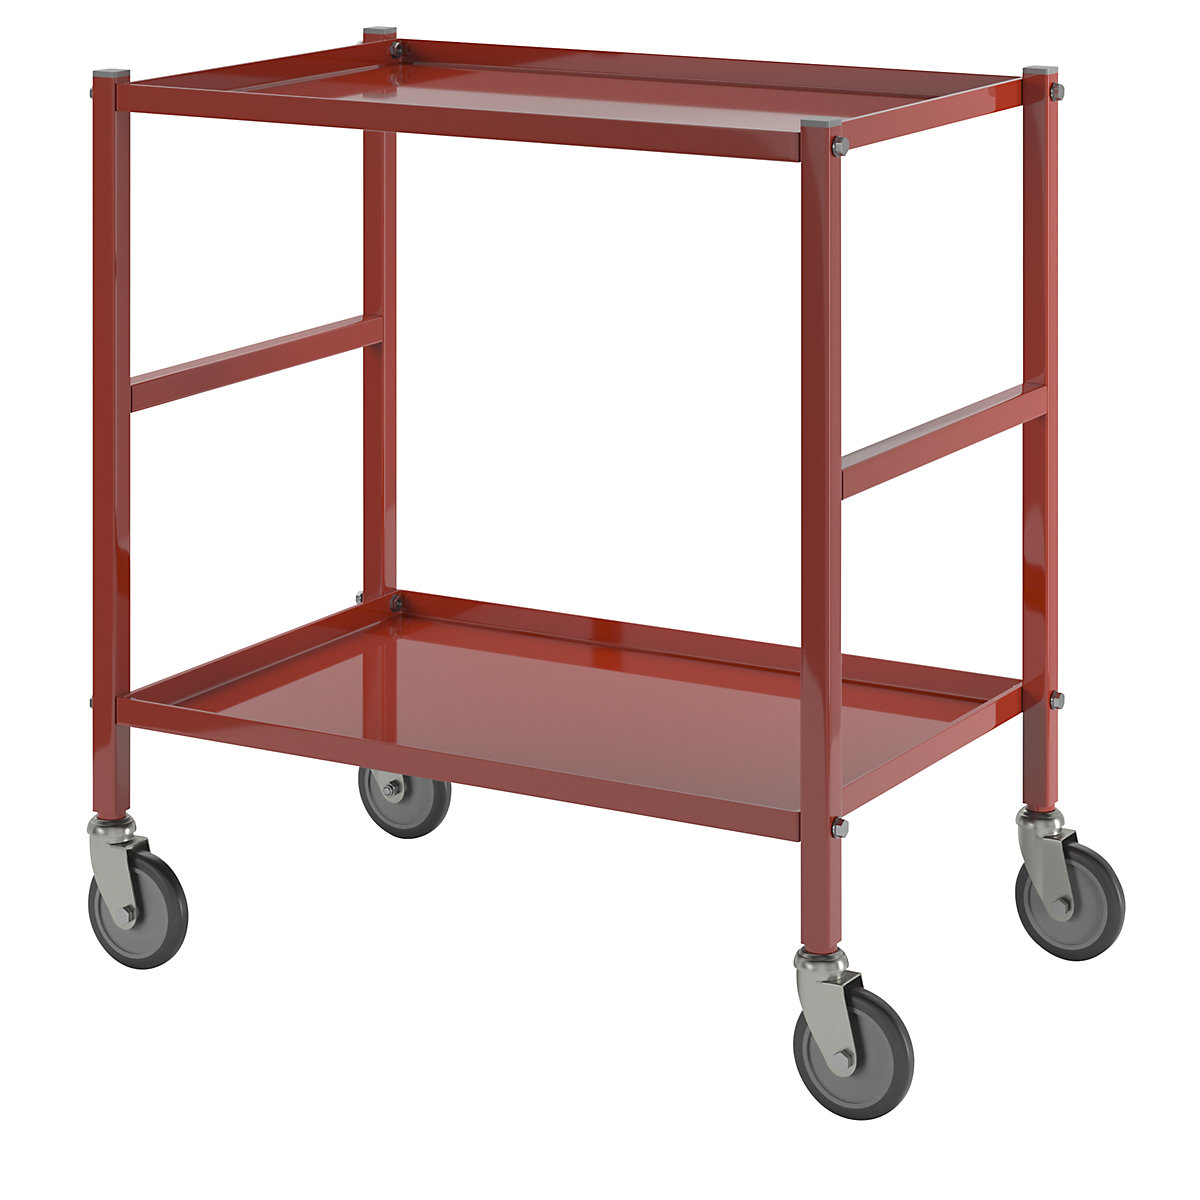 Table trolley with 2 shelves – Kongamek